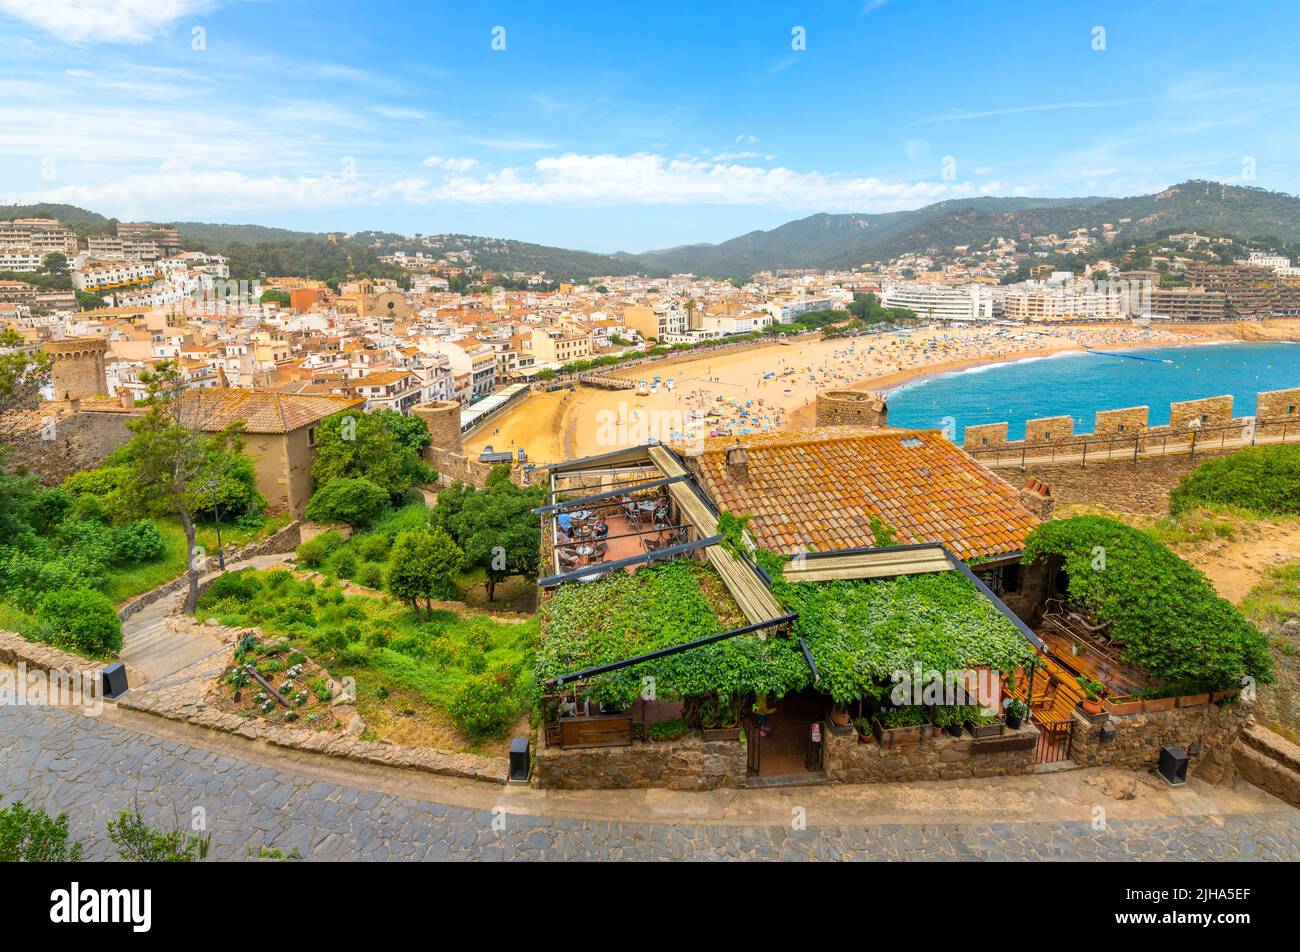 The 12th Century castle along the beach and coastline at the Costa Brava seaside village and town of Tossa de Mar, Spain. Stock Photo